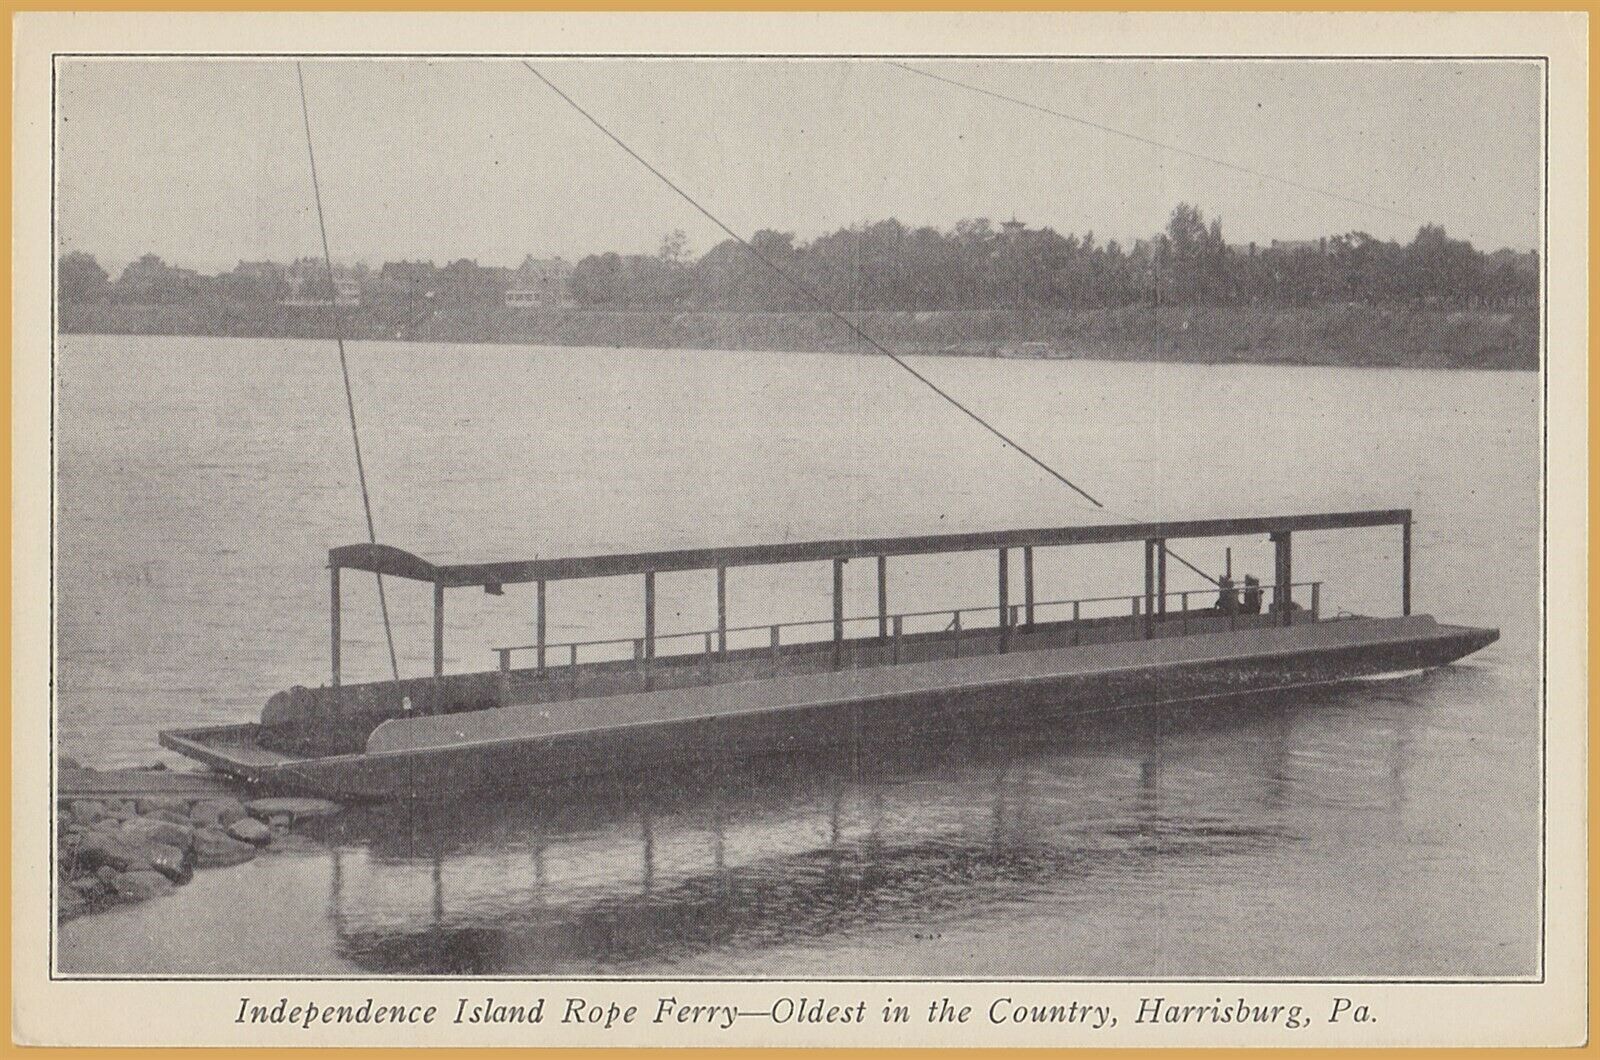 Harrisburg, Pa., Independence Island Rope Ferry, Oldest In The Country